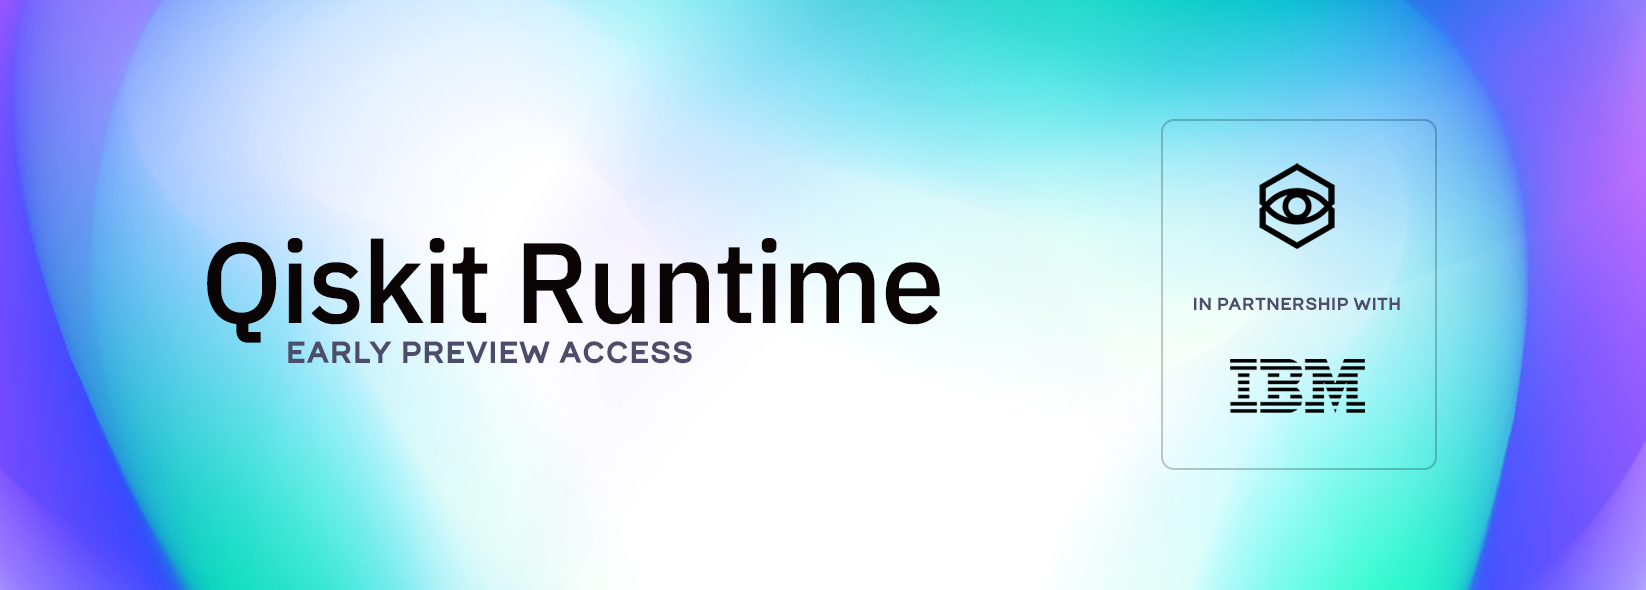 Qiskit Runtime Early Preview Access in partnership with IBM